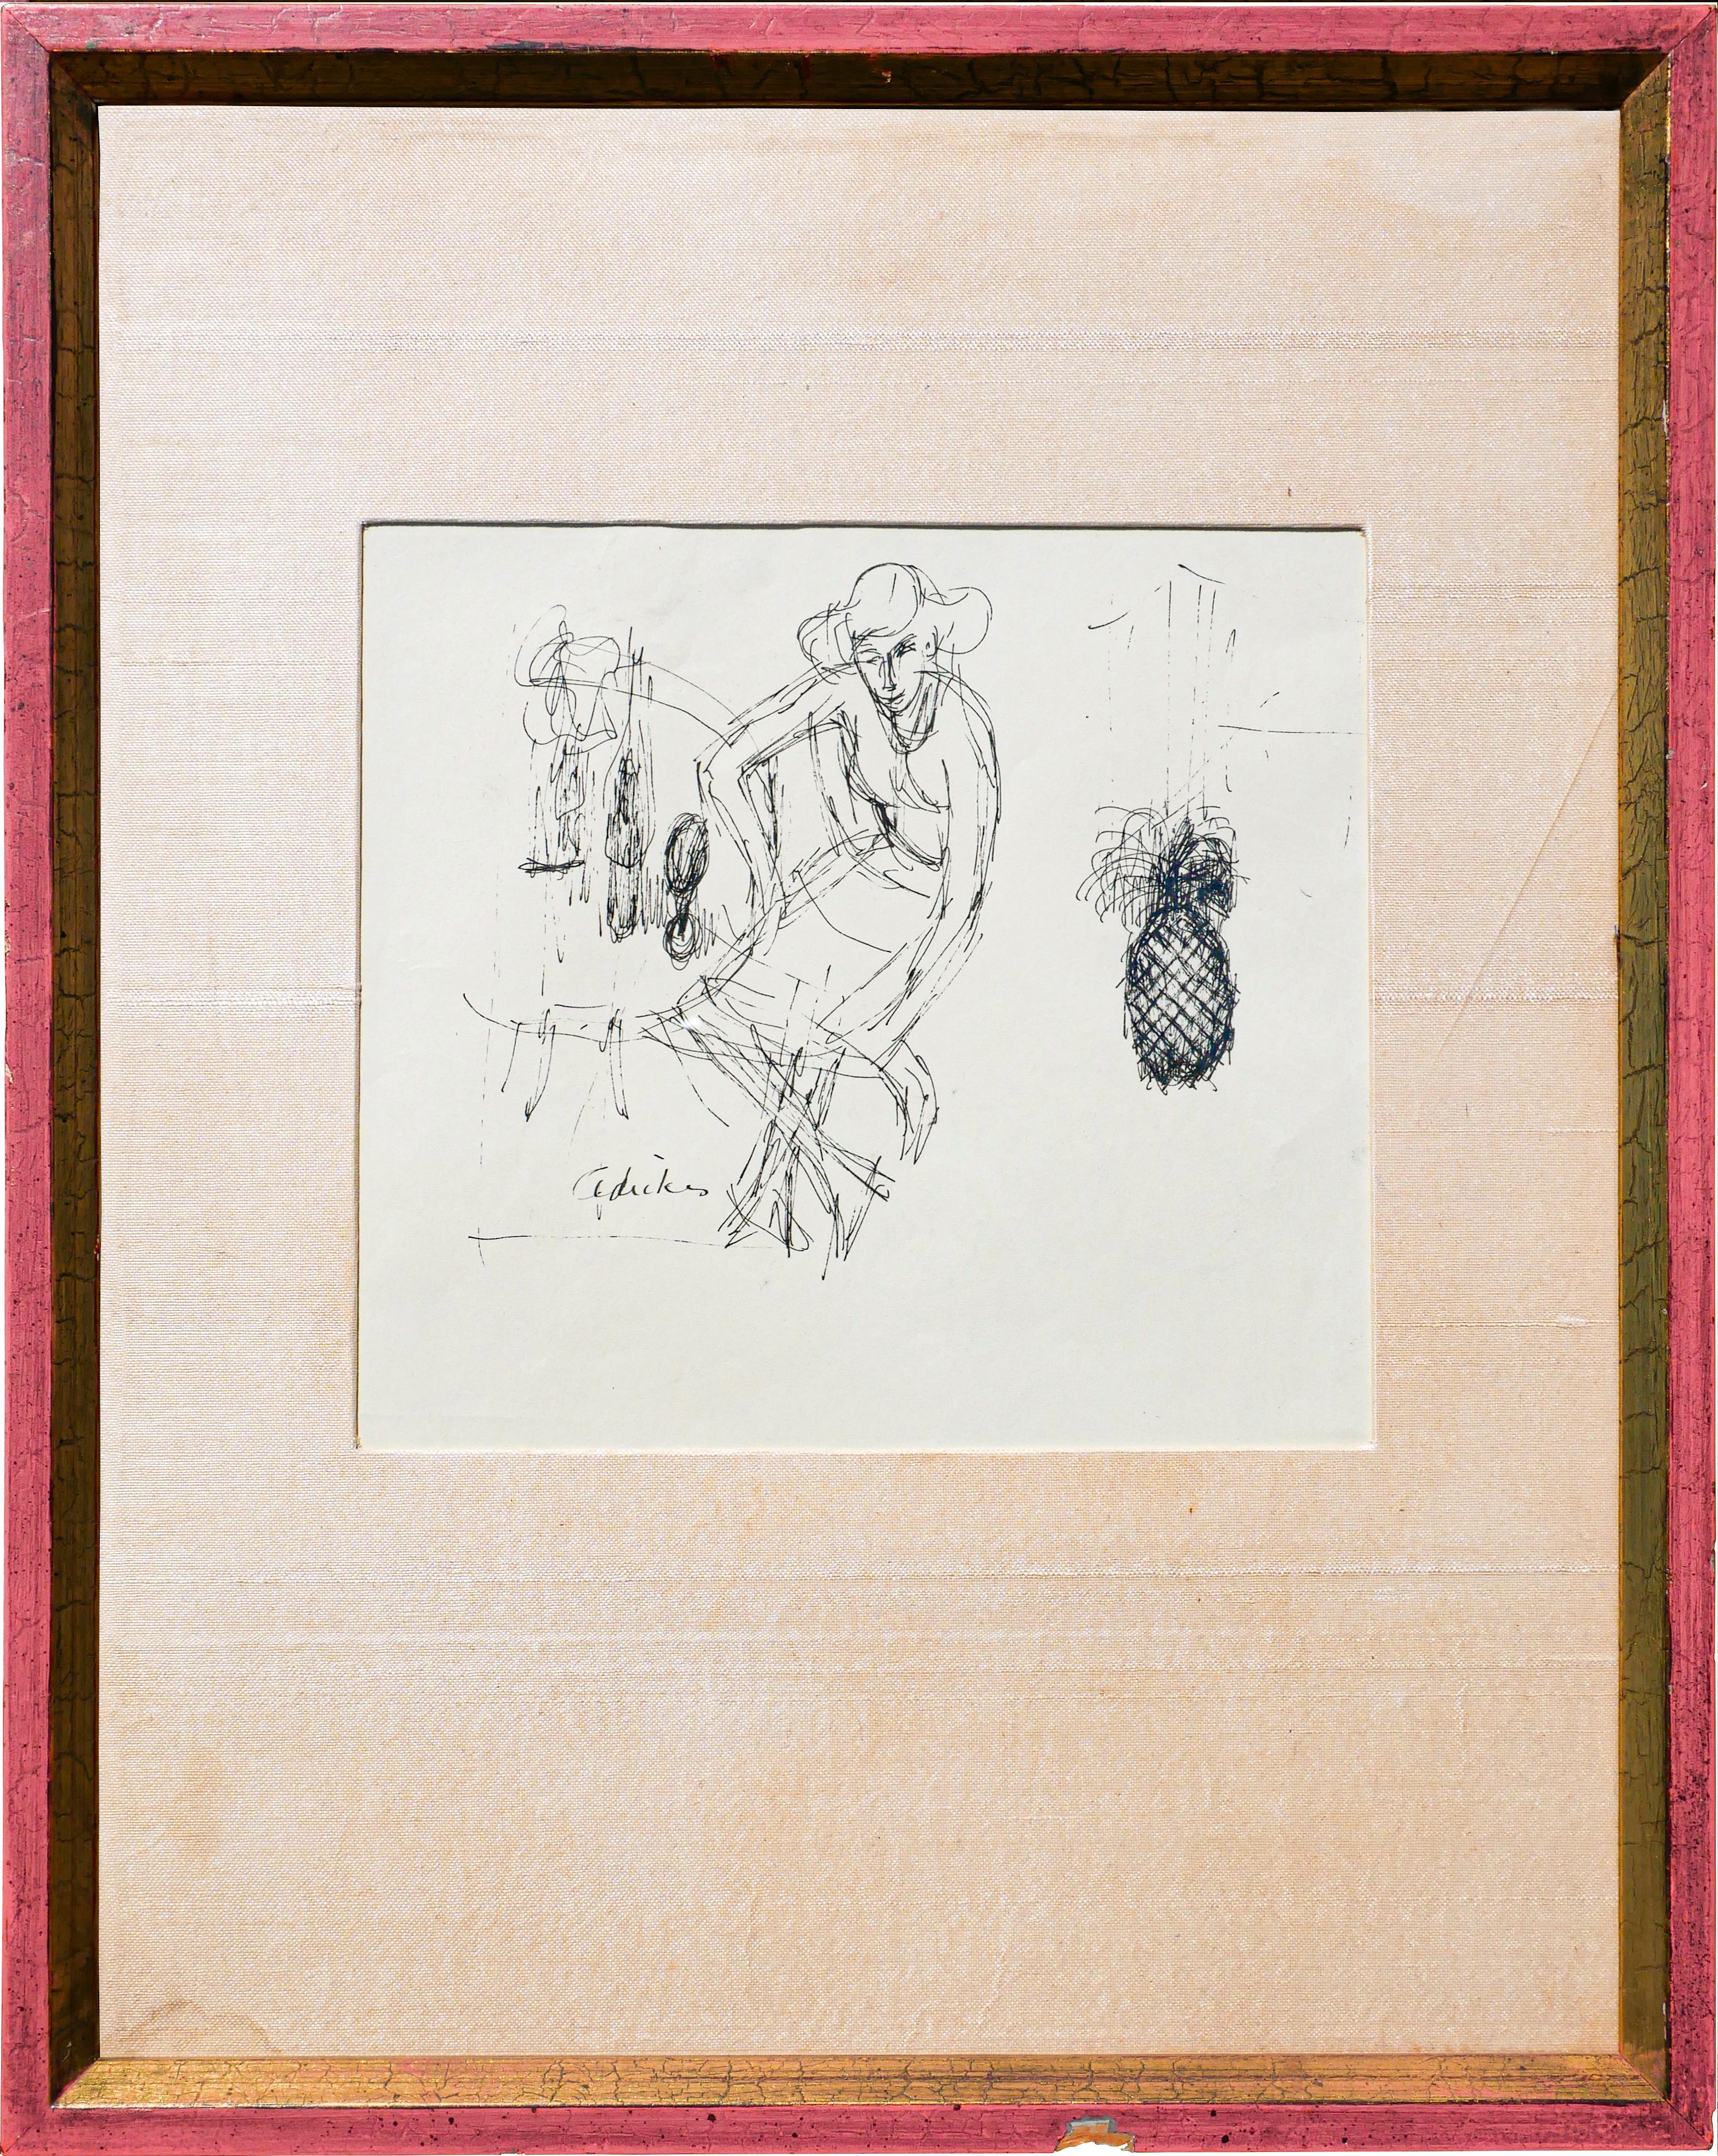 David Adickes Portrait - Abstract Figurative Drawing of a Lady and a Pineapple